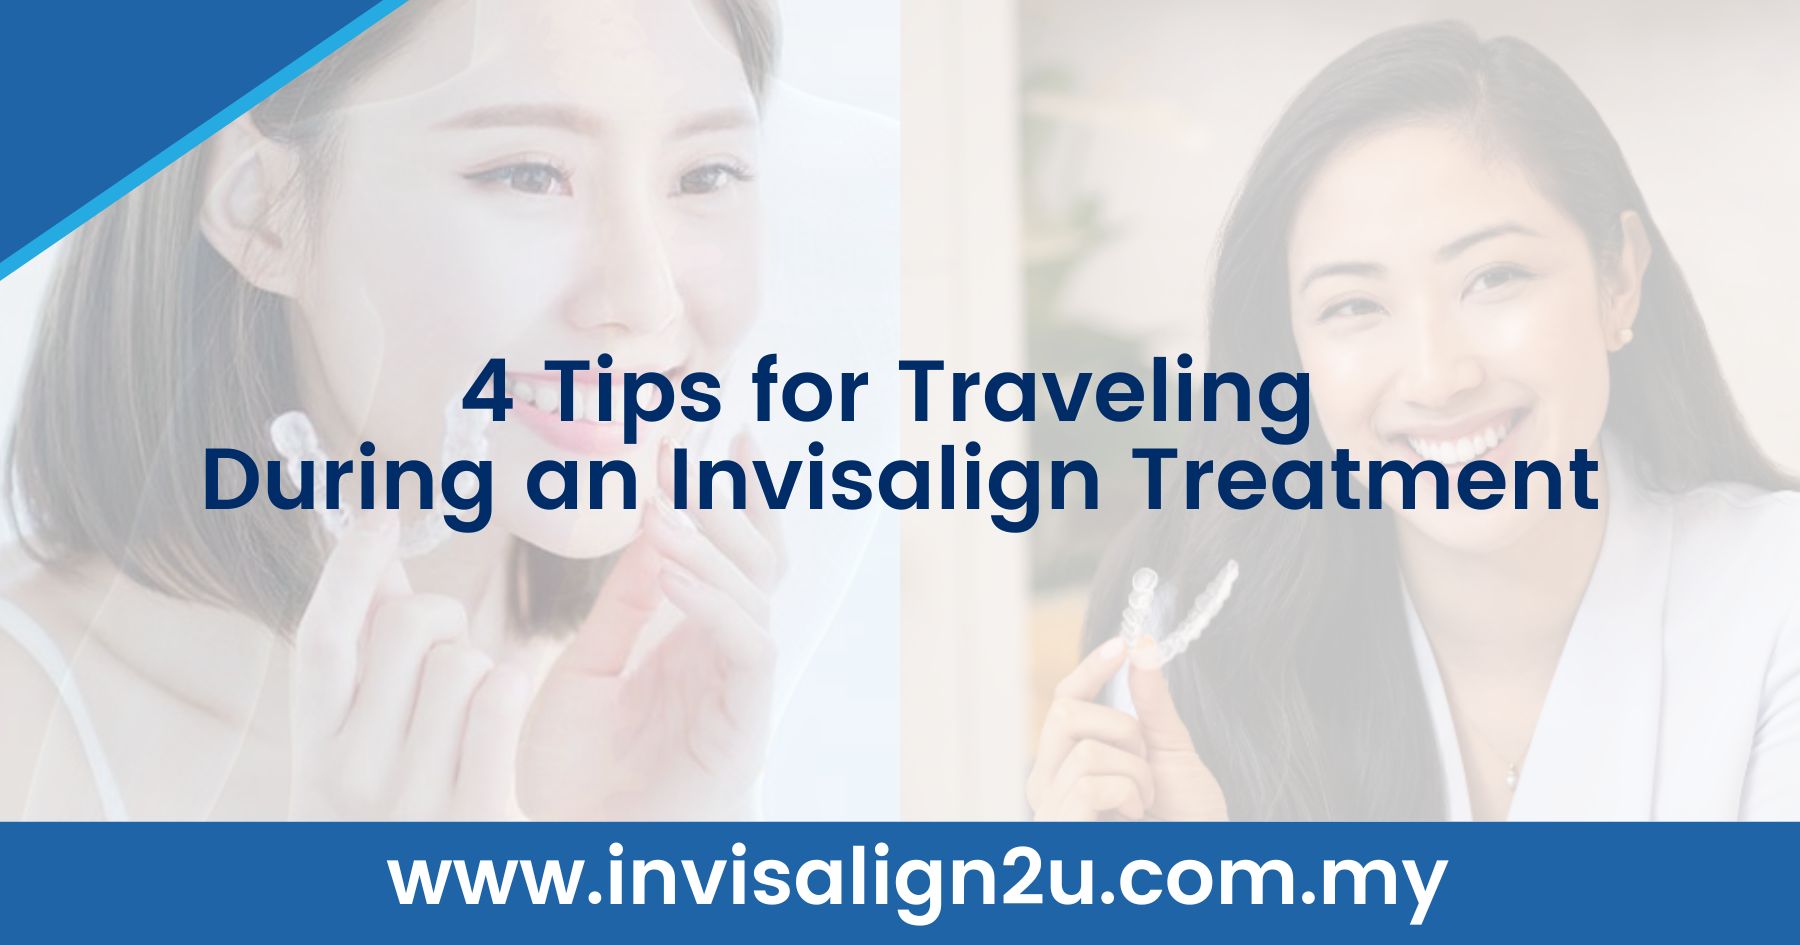 4 Tips for Traveling During an Invisalign Treatment